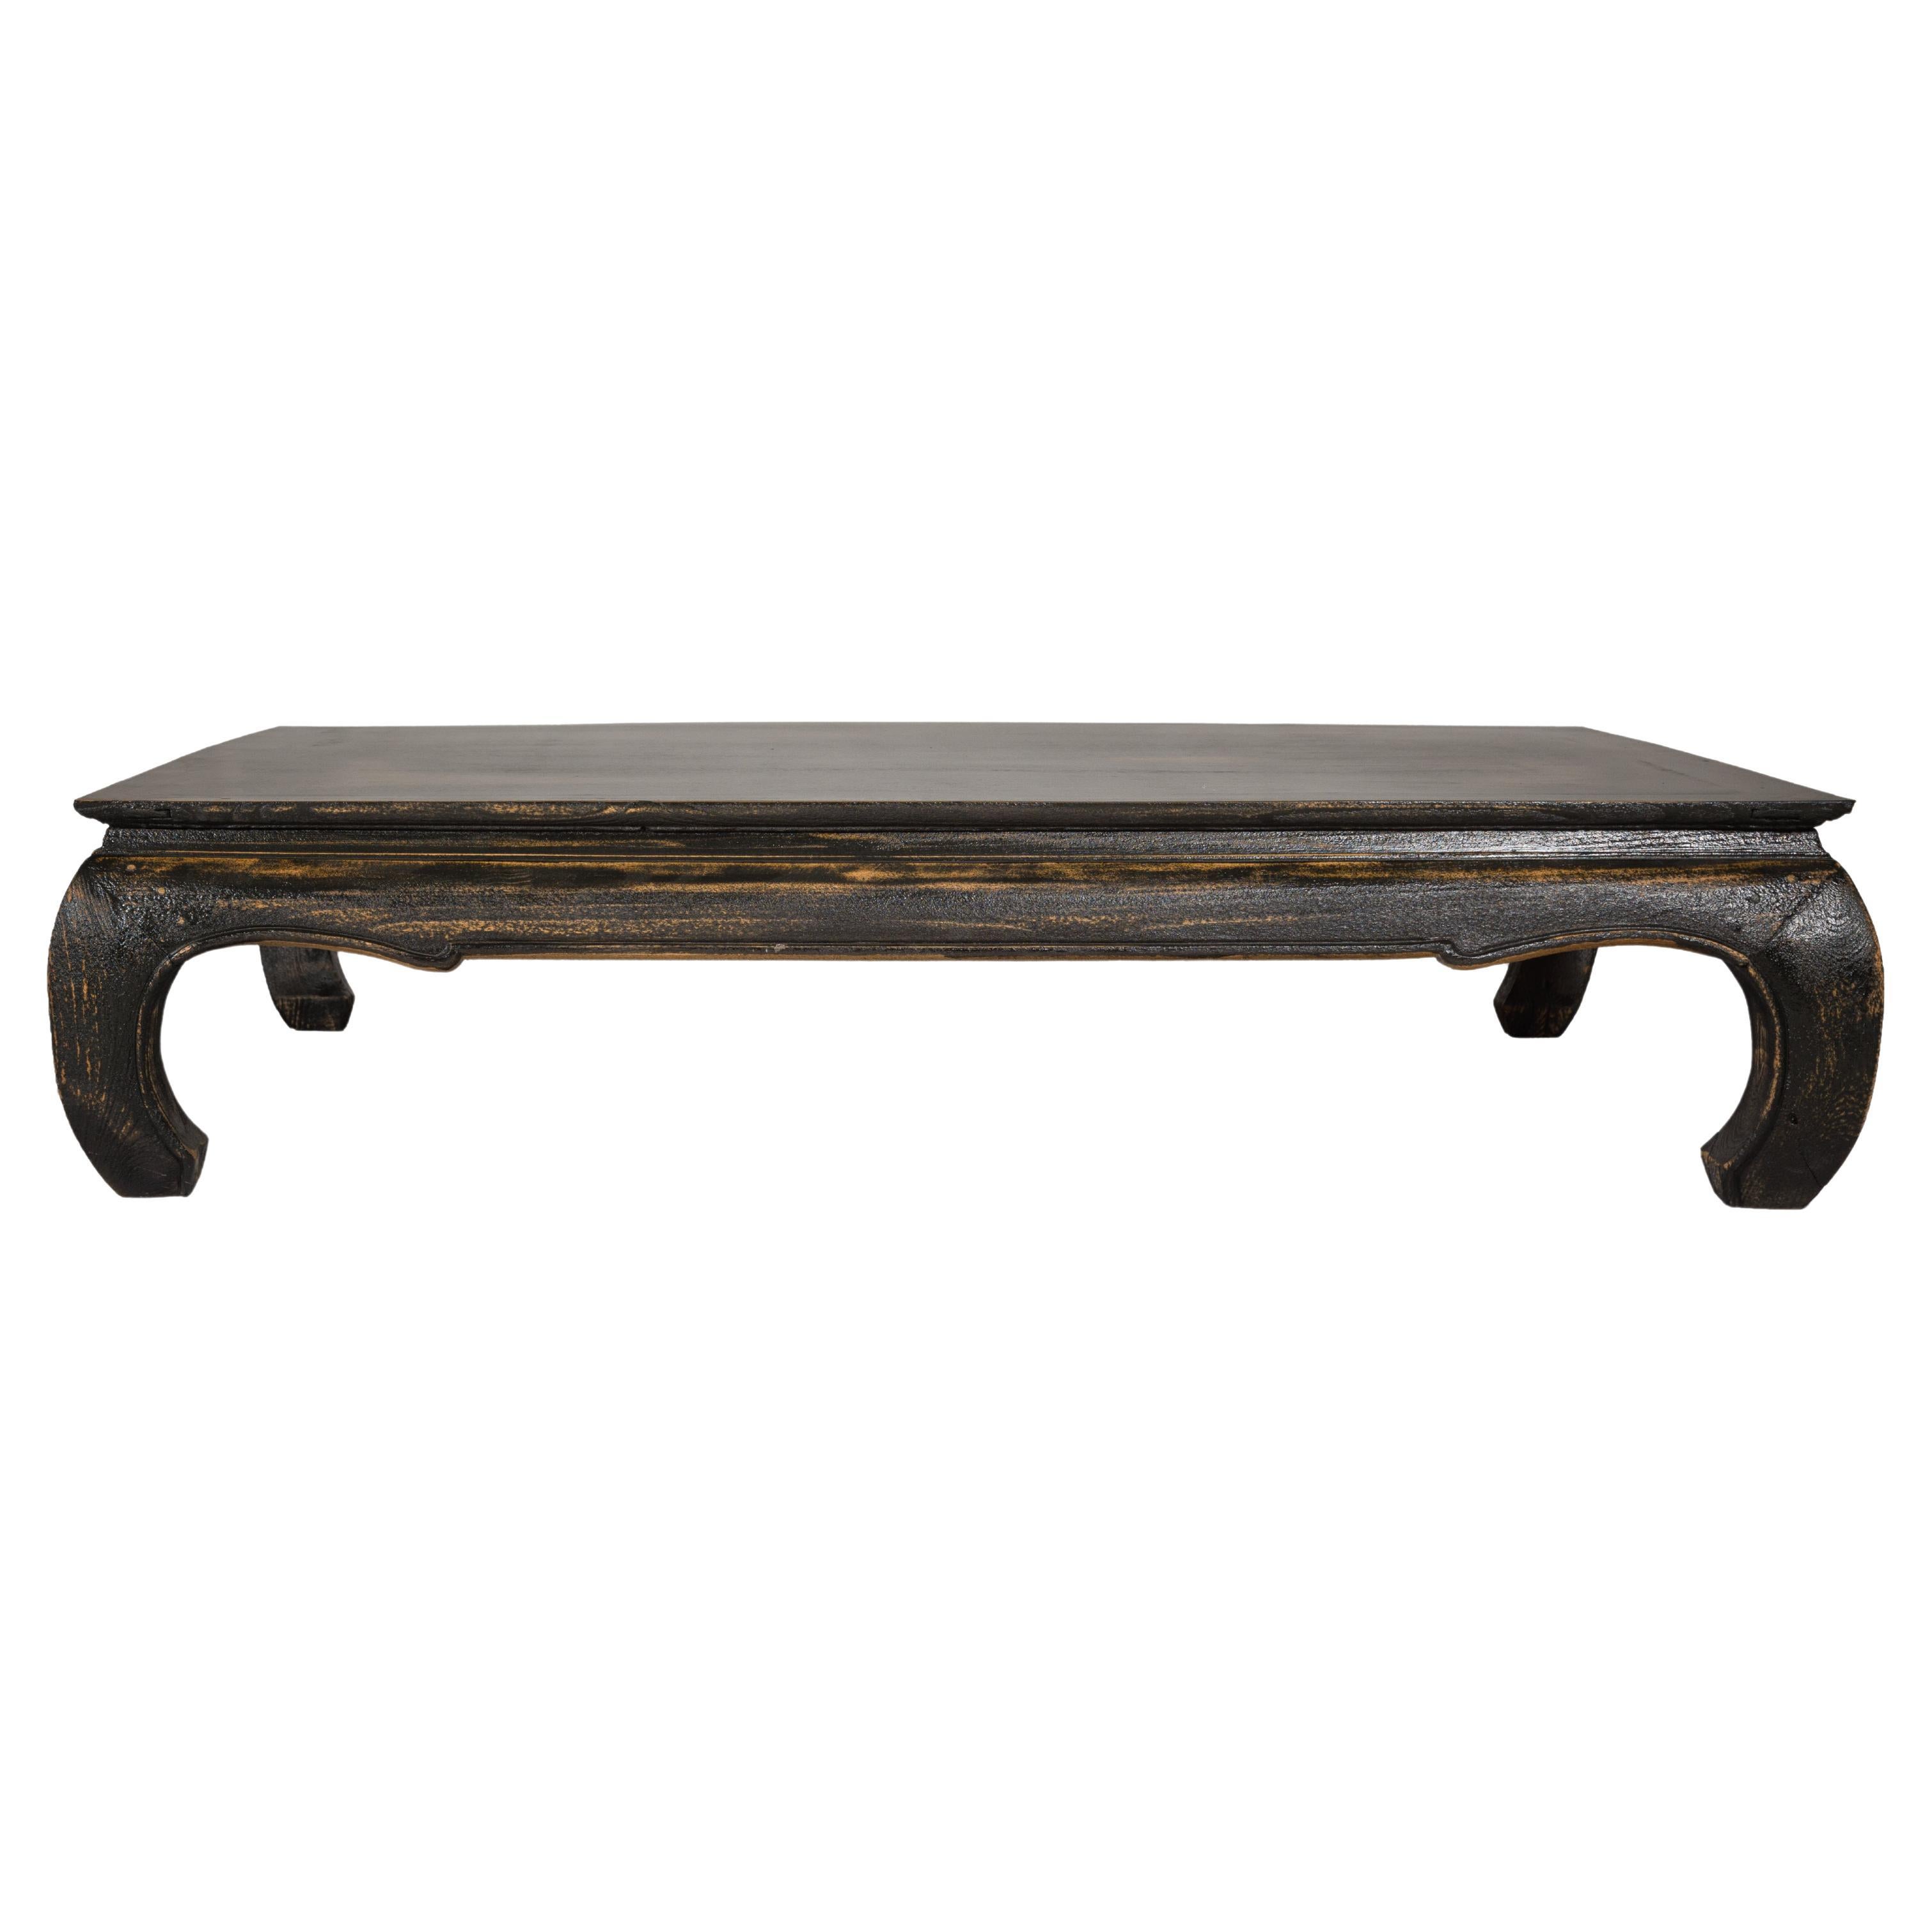 Chow Leg Low Kang Coffee Table with Distressed Black Finish, Midcentury For Sale